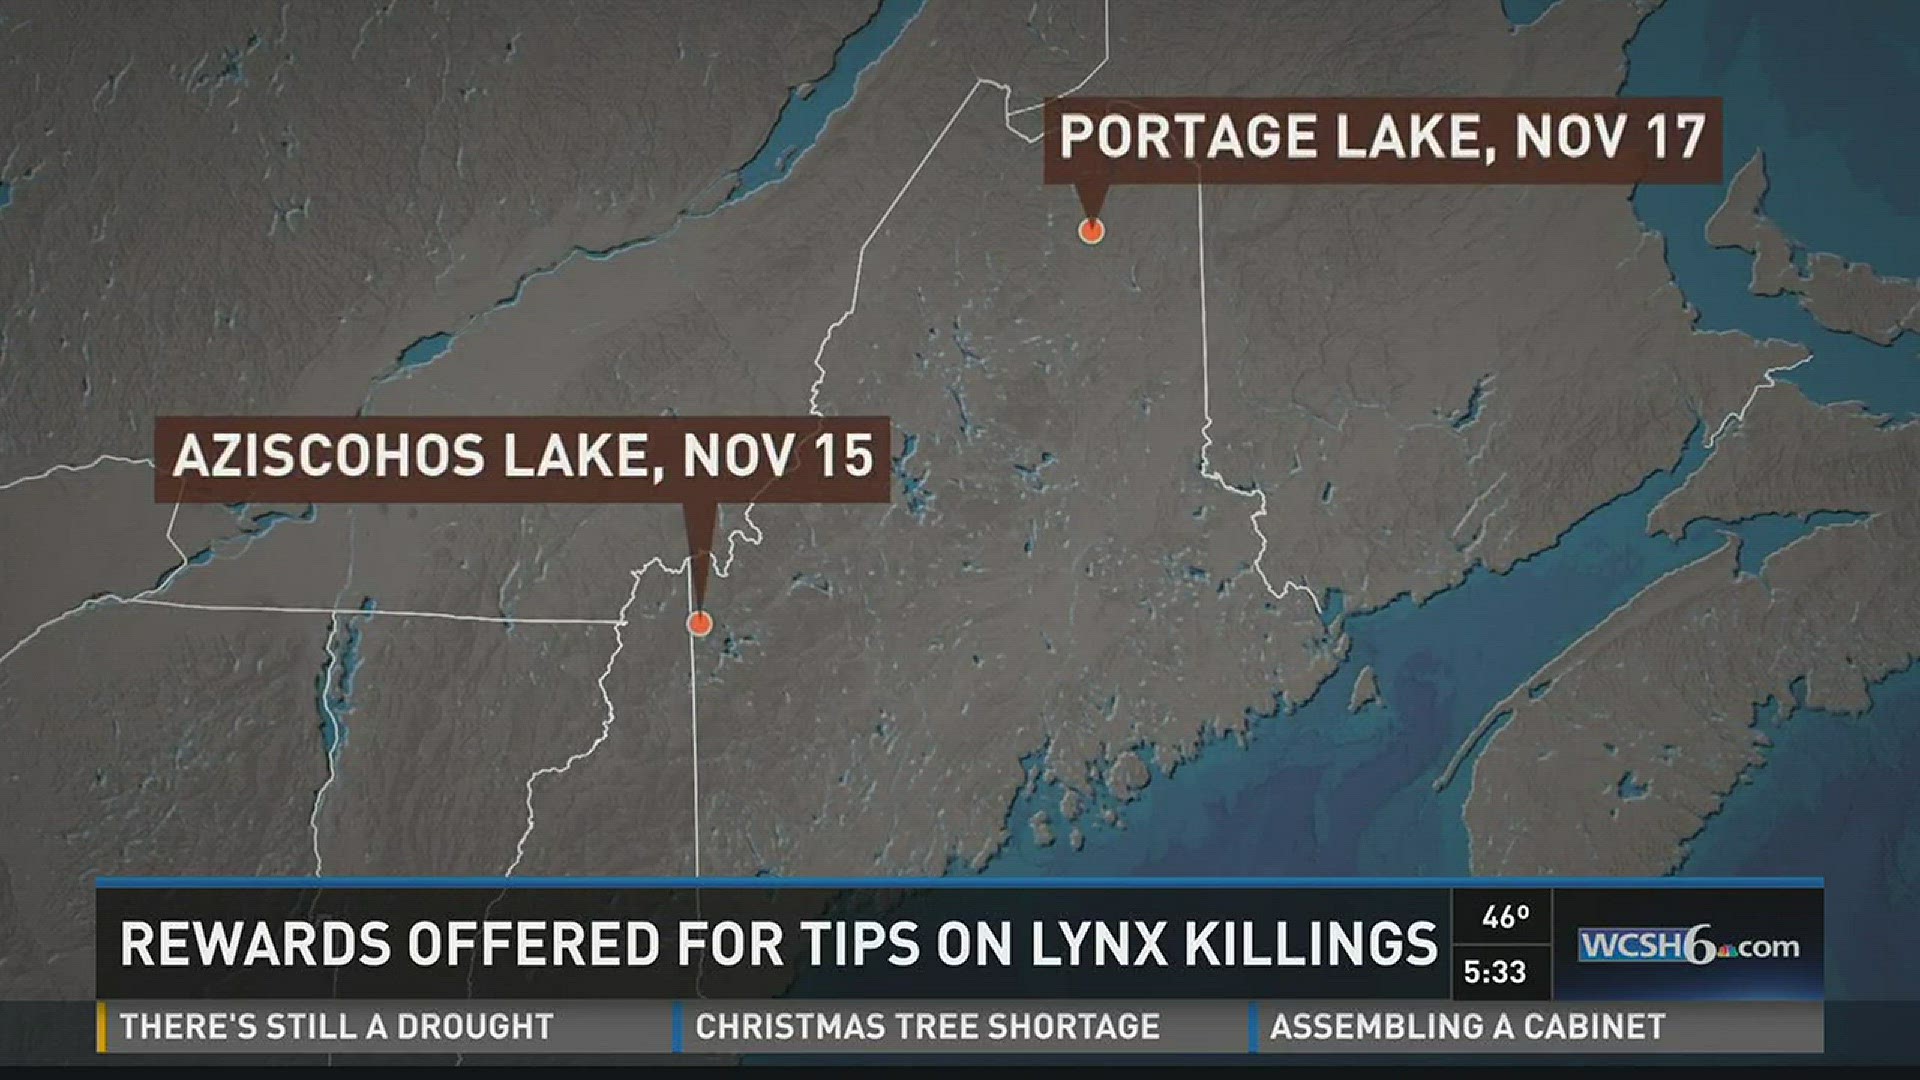 Rewards offered for tips on Lynx killings